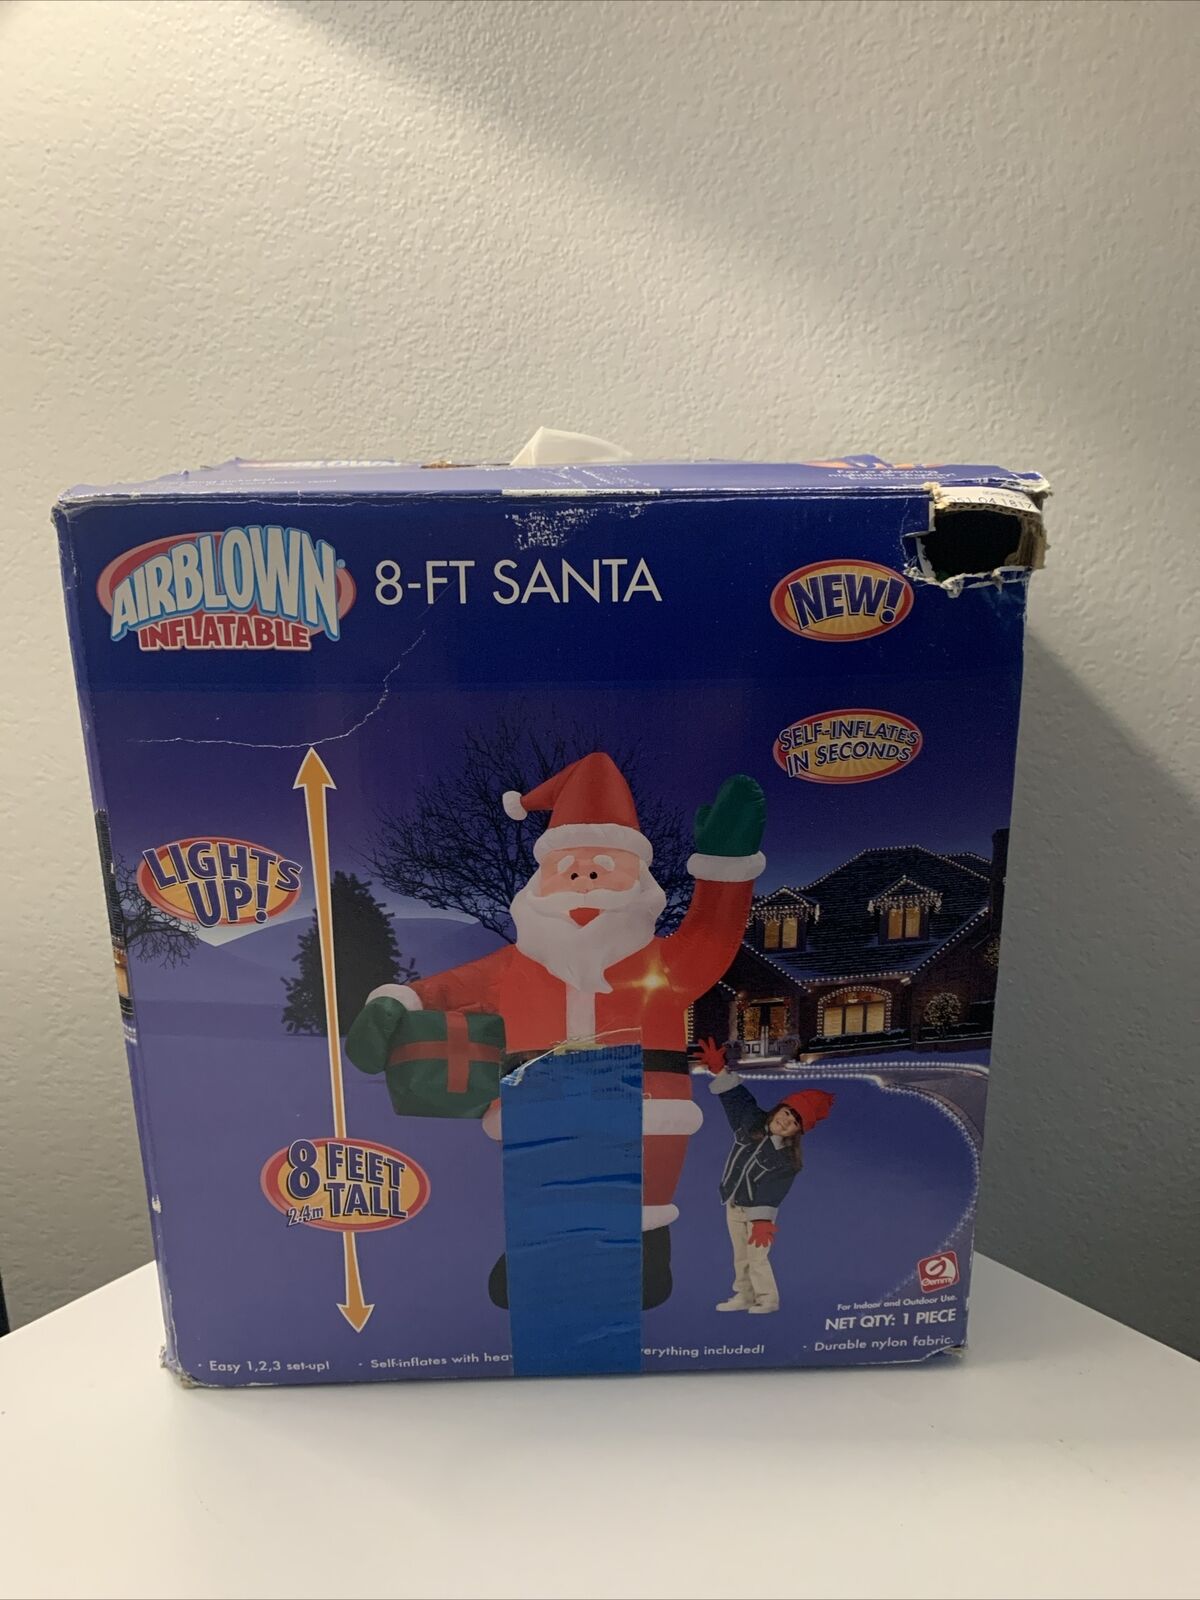 Gemmy 2006 Airblown Inflatable 8-ft Santa Lights Up Tested And Works 